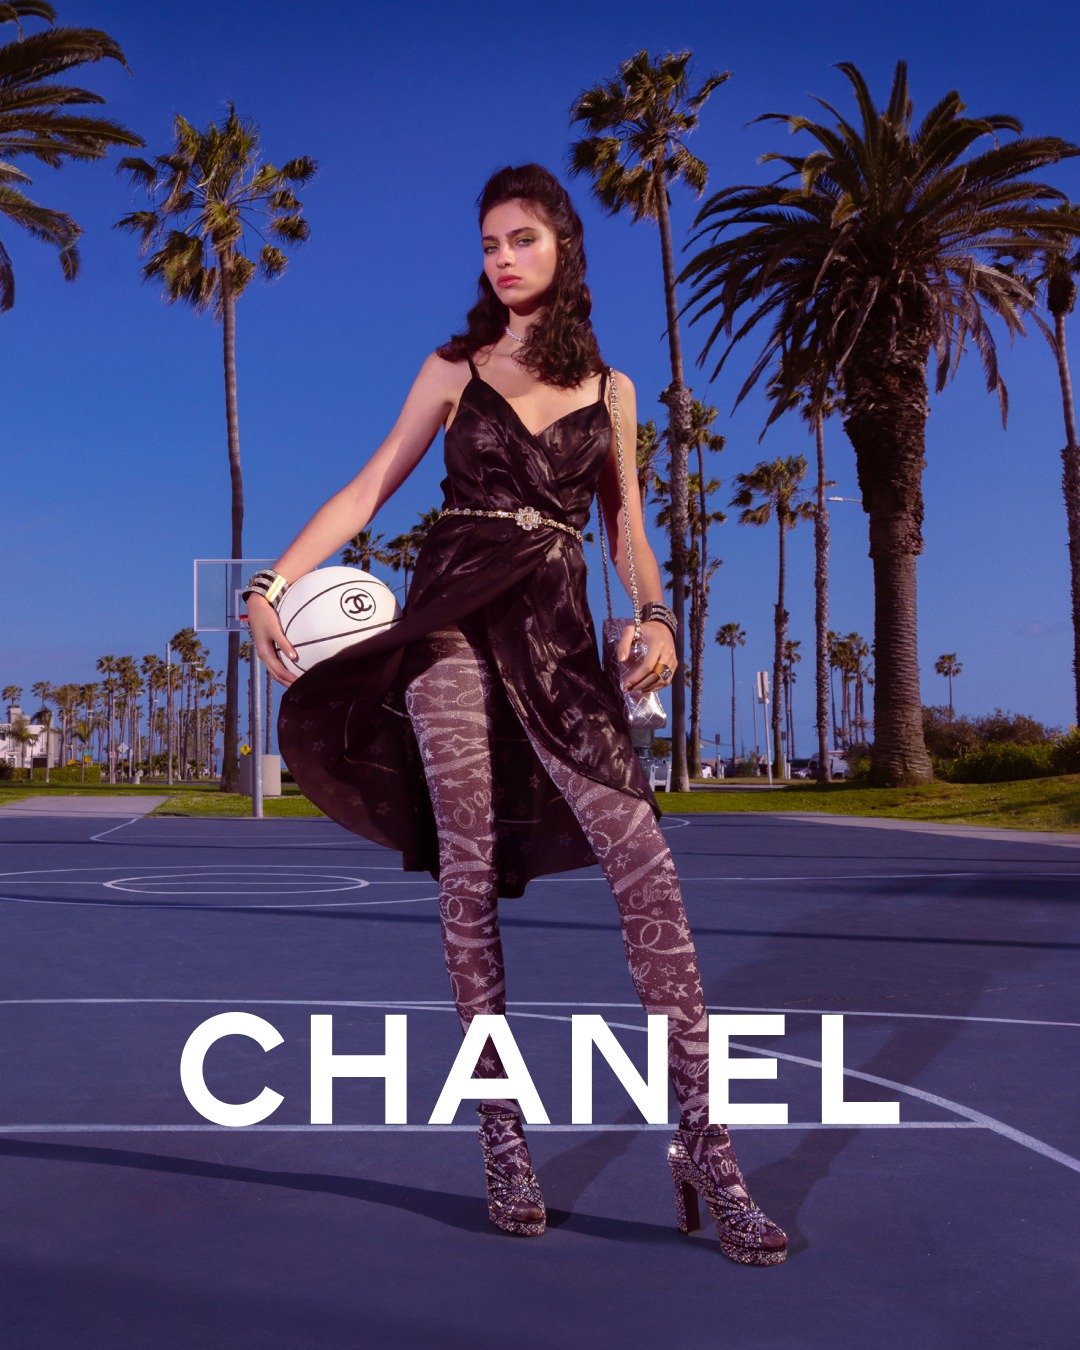 Chanel — Style News, Fashion Photography, Interviews